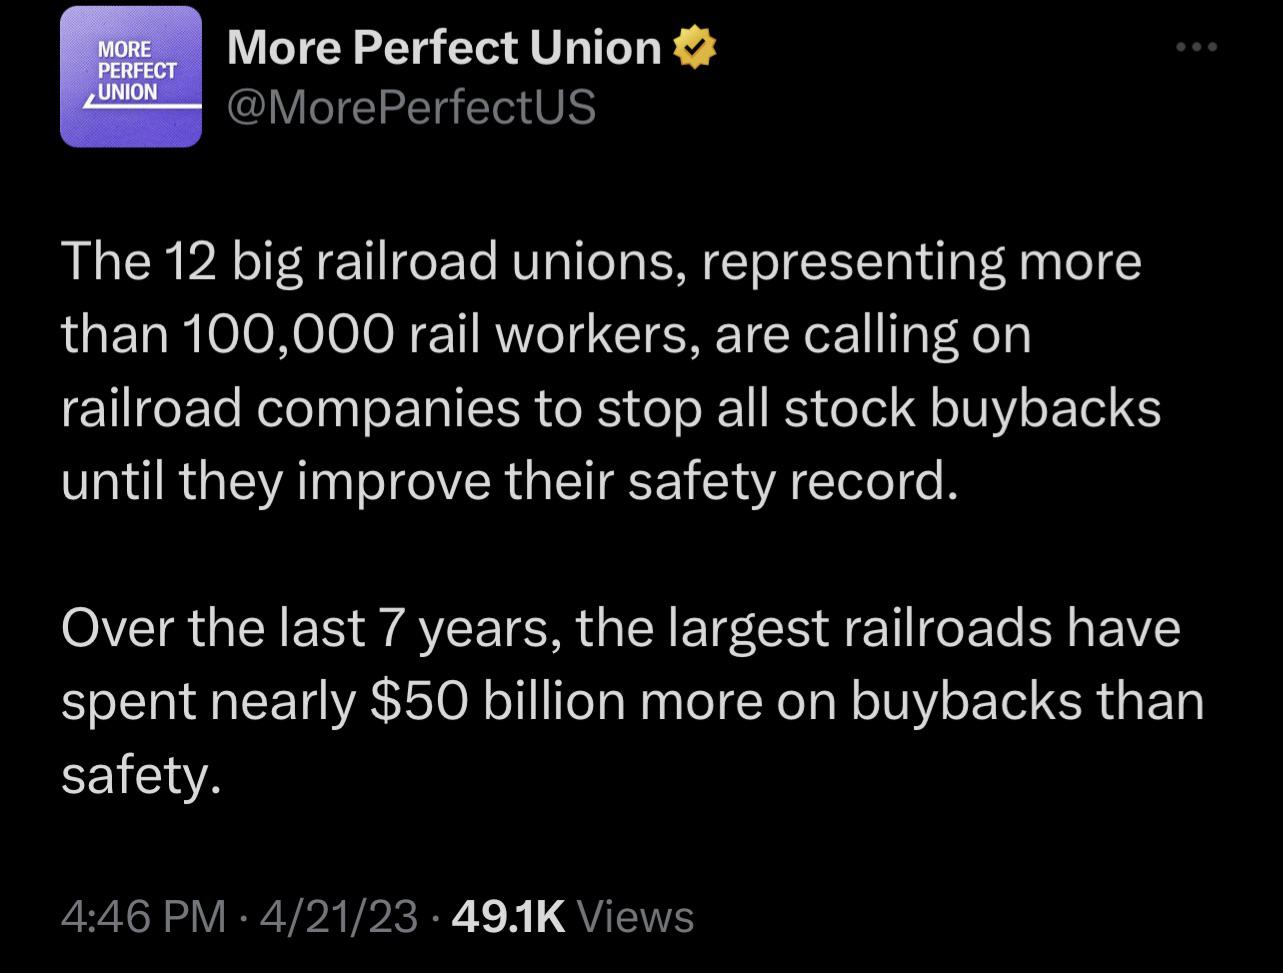 anitwork memes - atmosphere - More Perfect Union More Perfect Union The 12 big railroad unions, representing more than 100,000 rail workers, are calling on railroad companies to stop all stock buybacks until they improve their safety record. Over the last